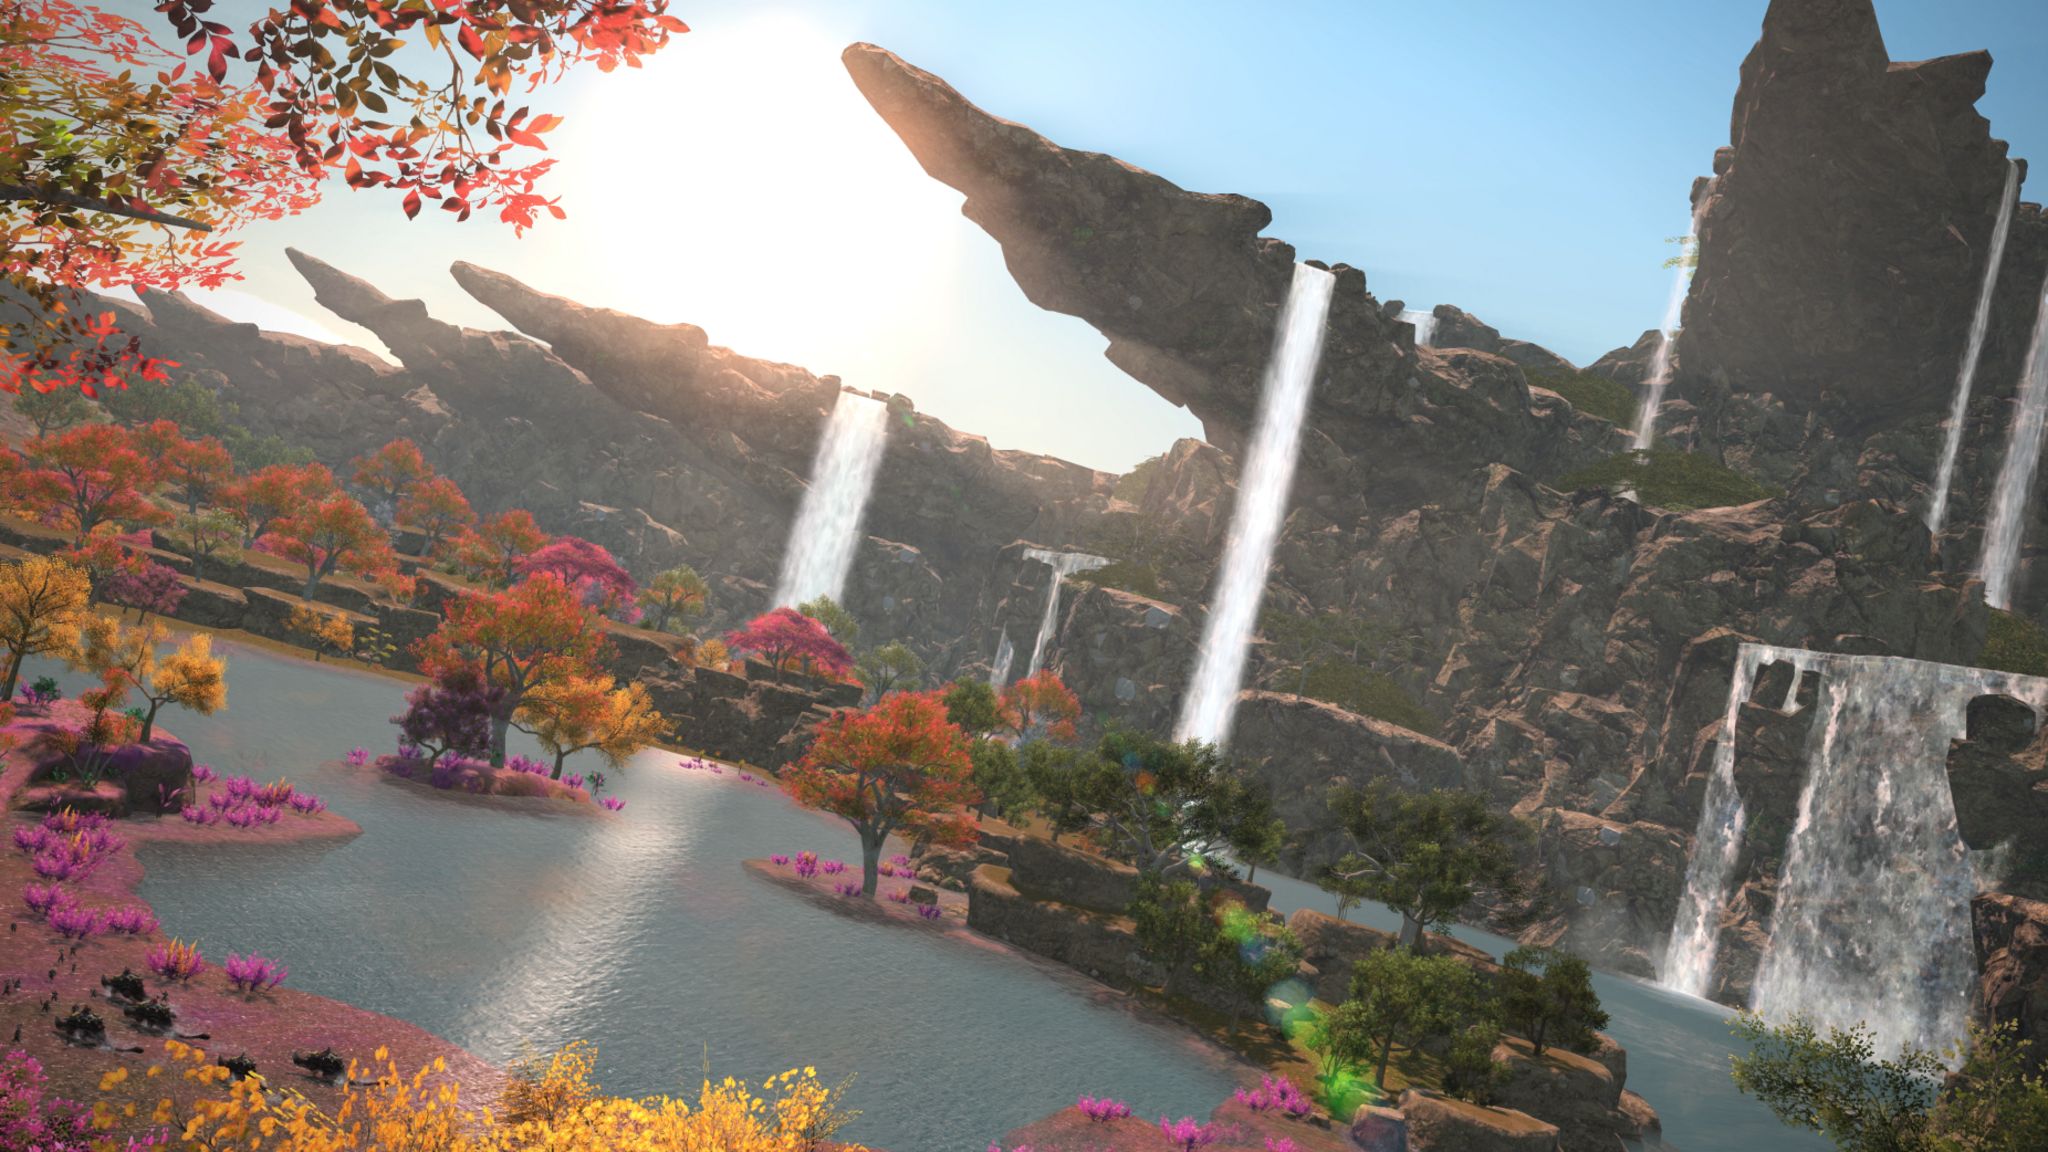 A still from Final Fantasy showing colourful trees, a waterfall and blue water, with high rocks and hills.